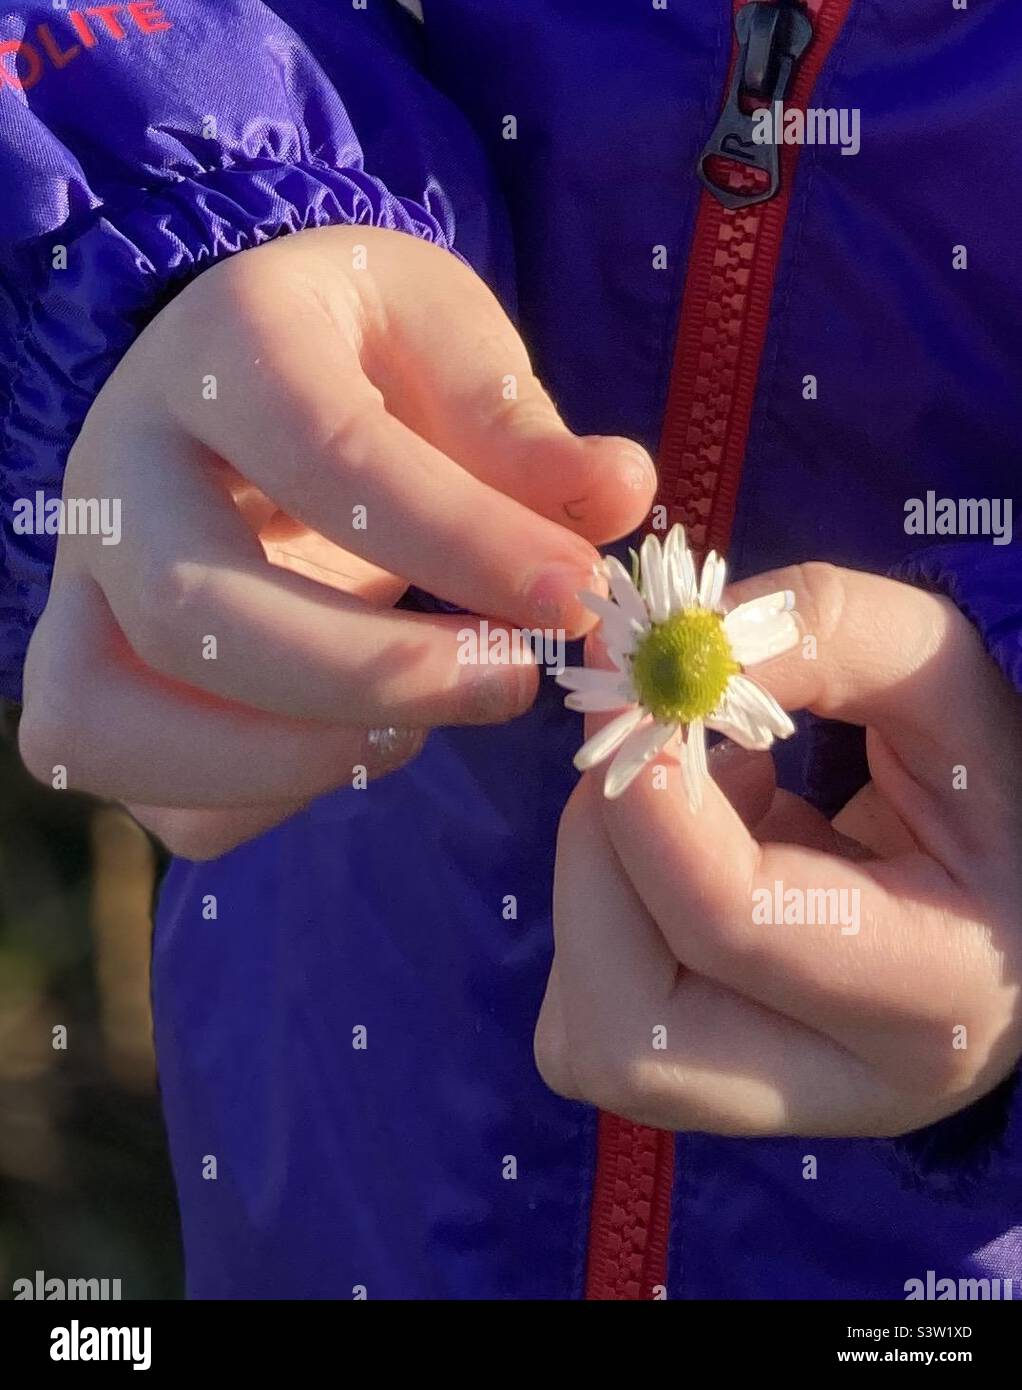 Young child holding a daisy flower. Hands clearly visible. Stock Photo